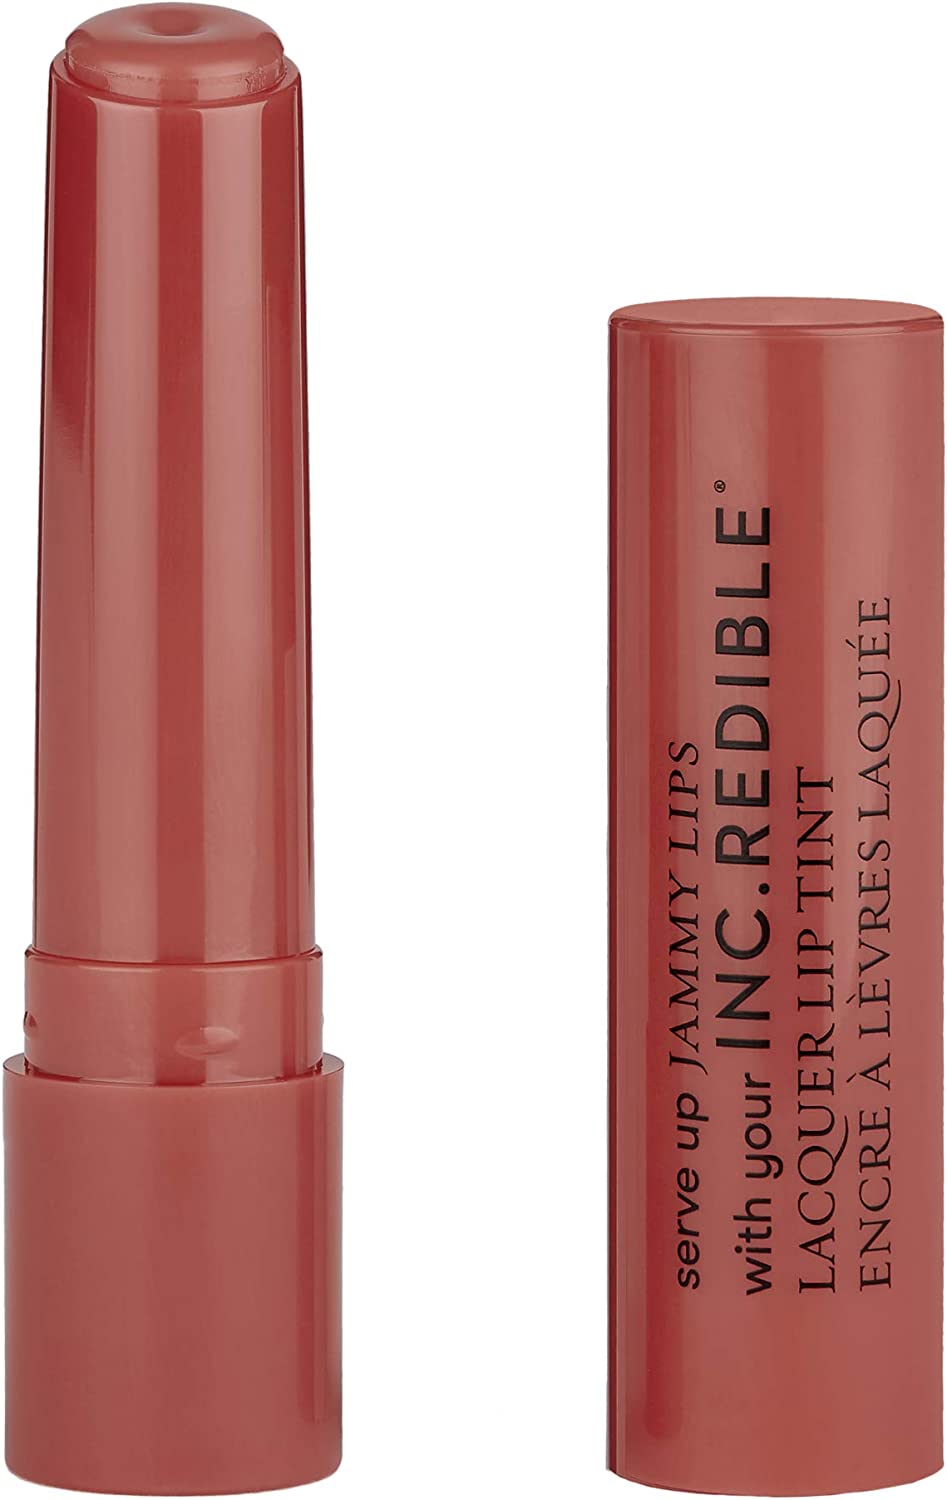 Load image into Gallery viewer, INC.redible Jammy Lips - Fruity Feels Juicy Dusky Pink Lip Balm
